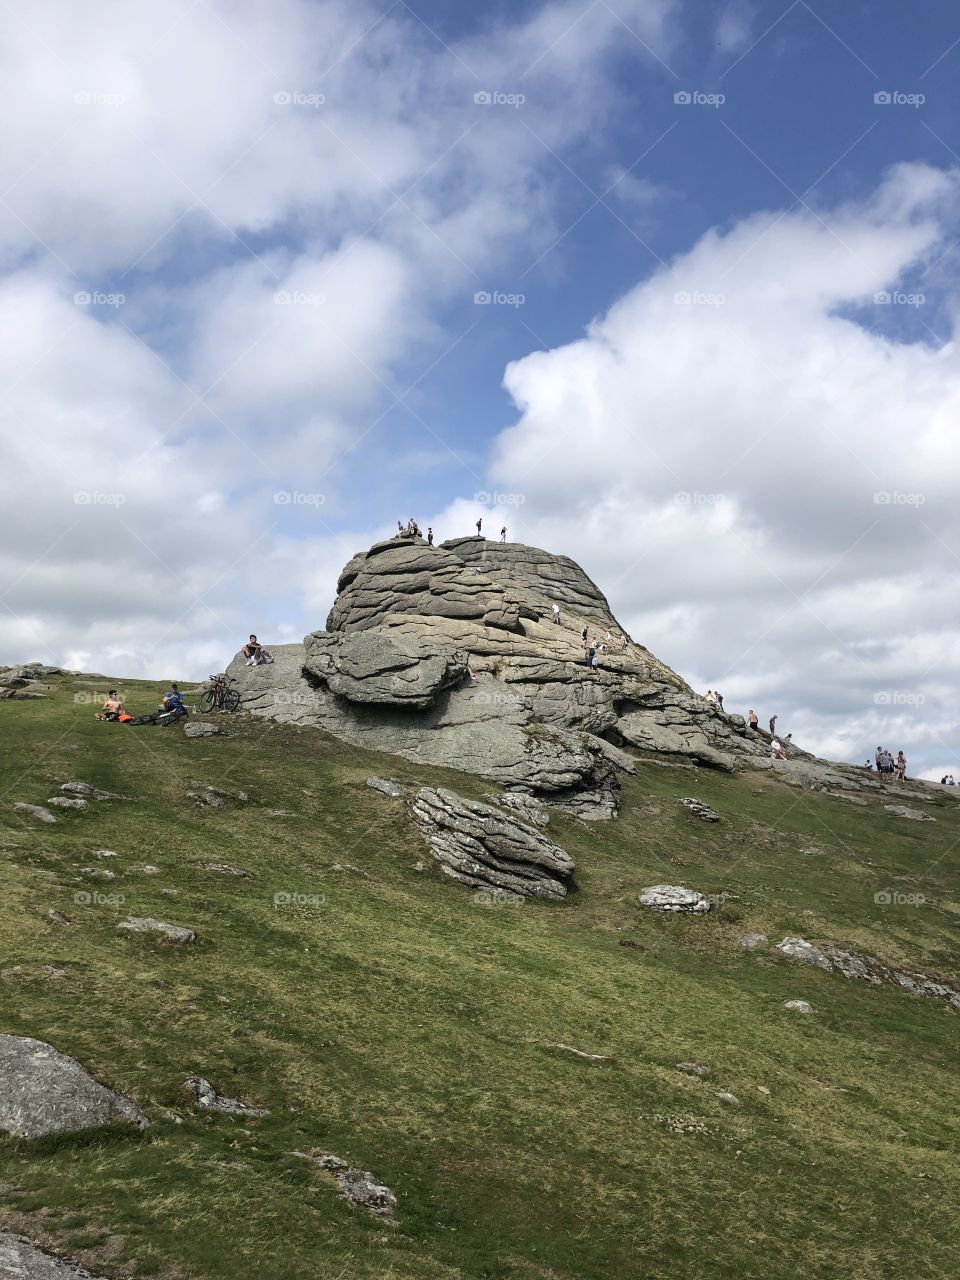 Witnessing the popularity of Dartmoor National Park’s famous Haytor, Devon on a hot melted of a day.